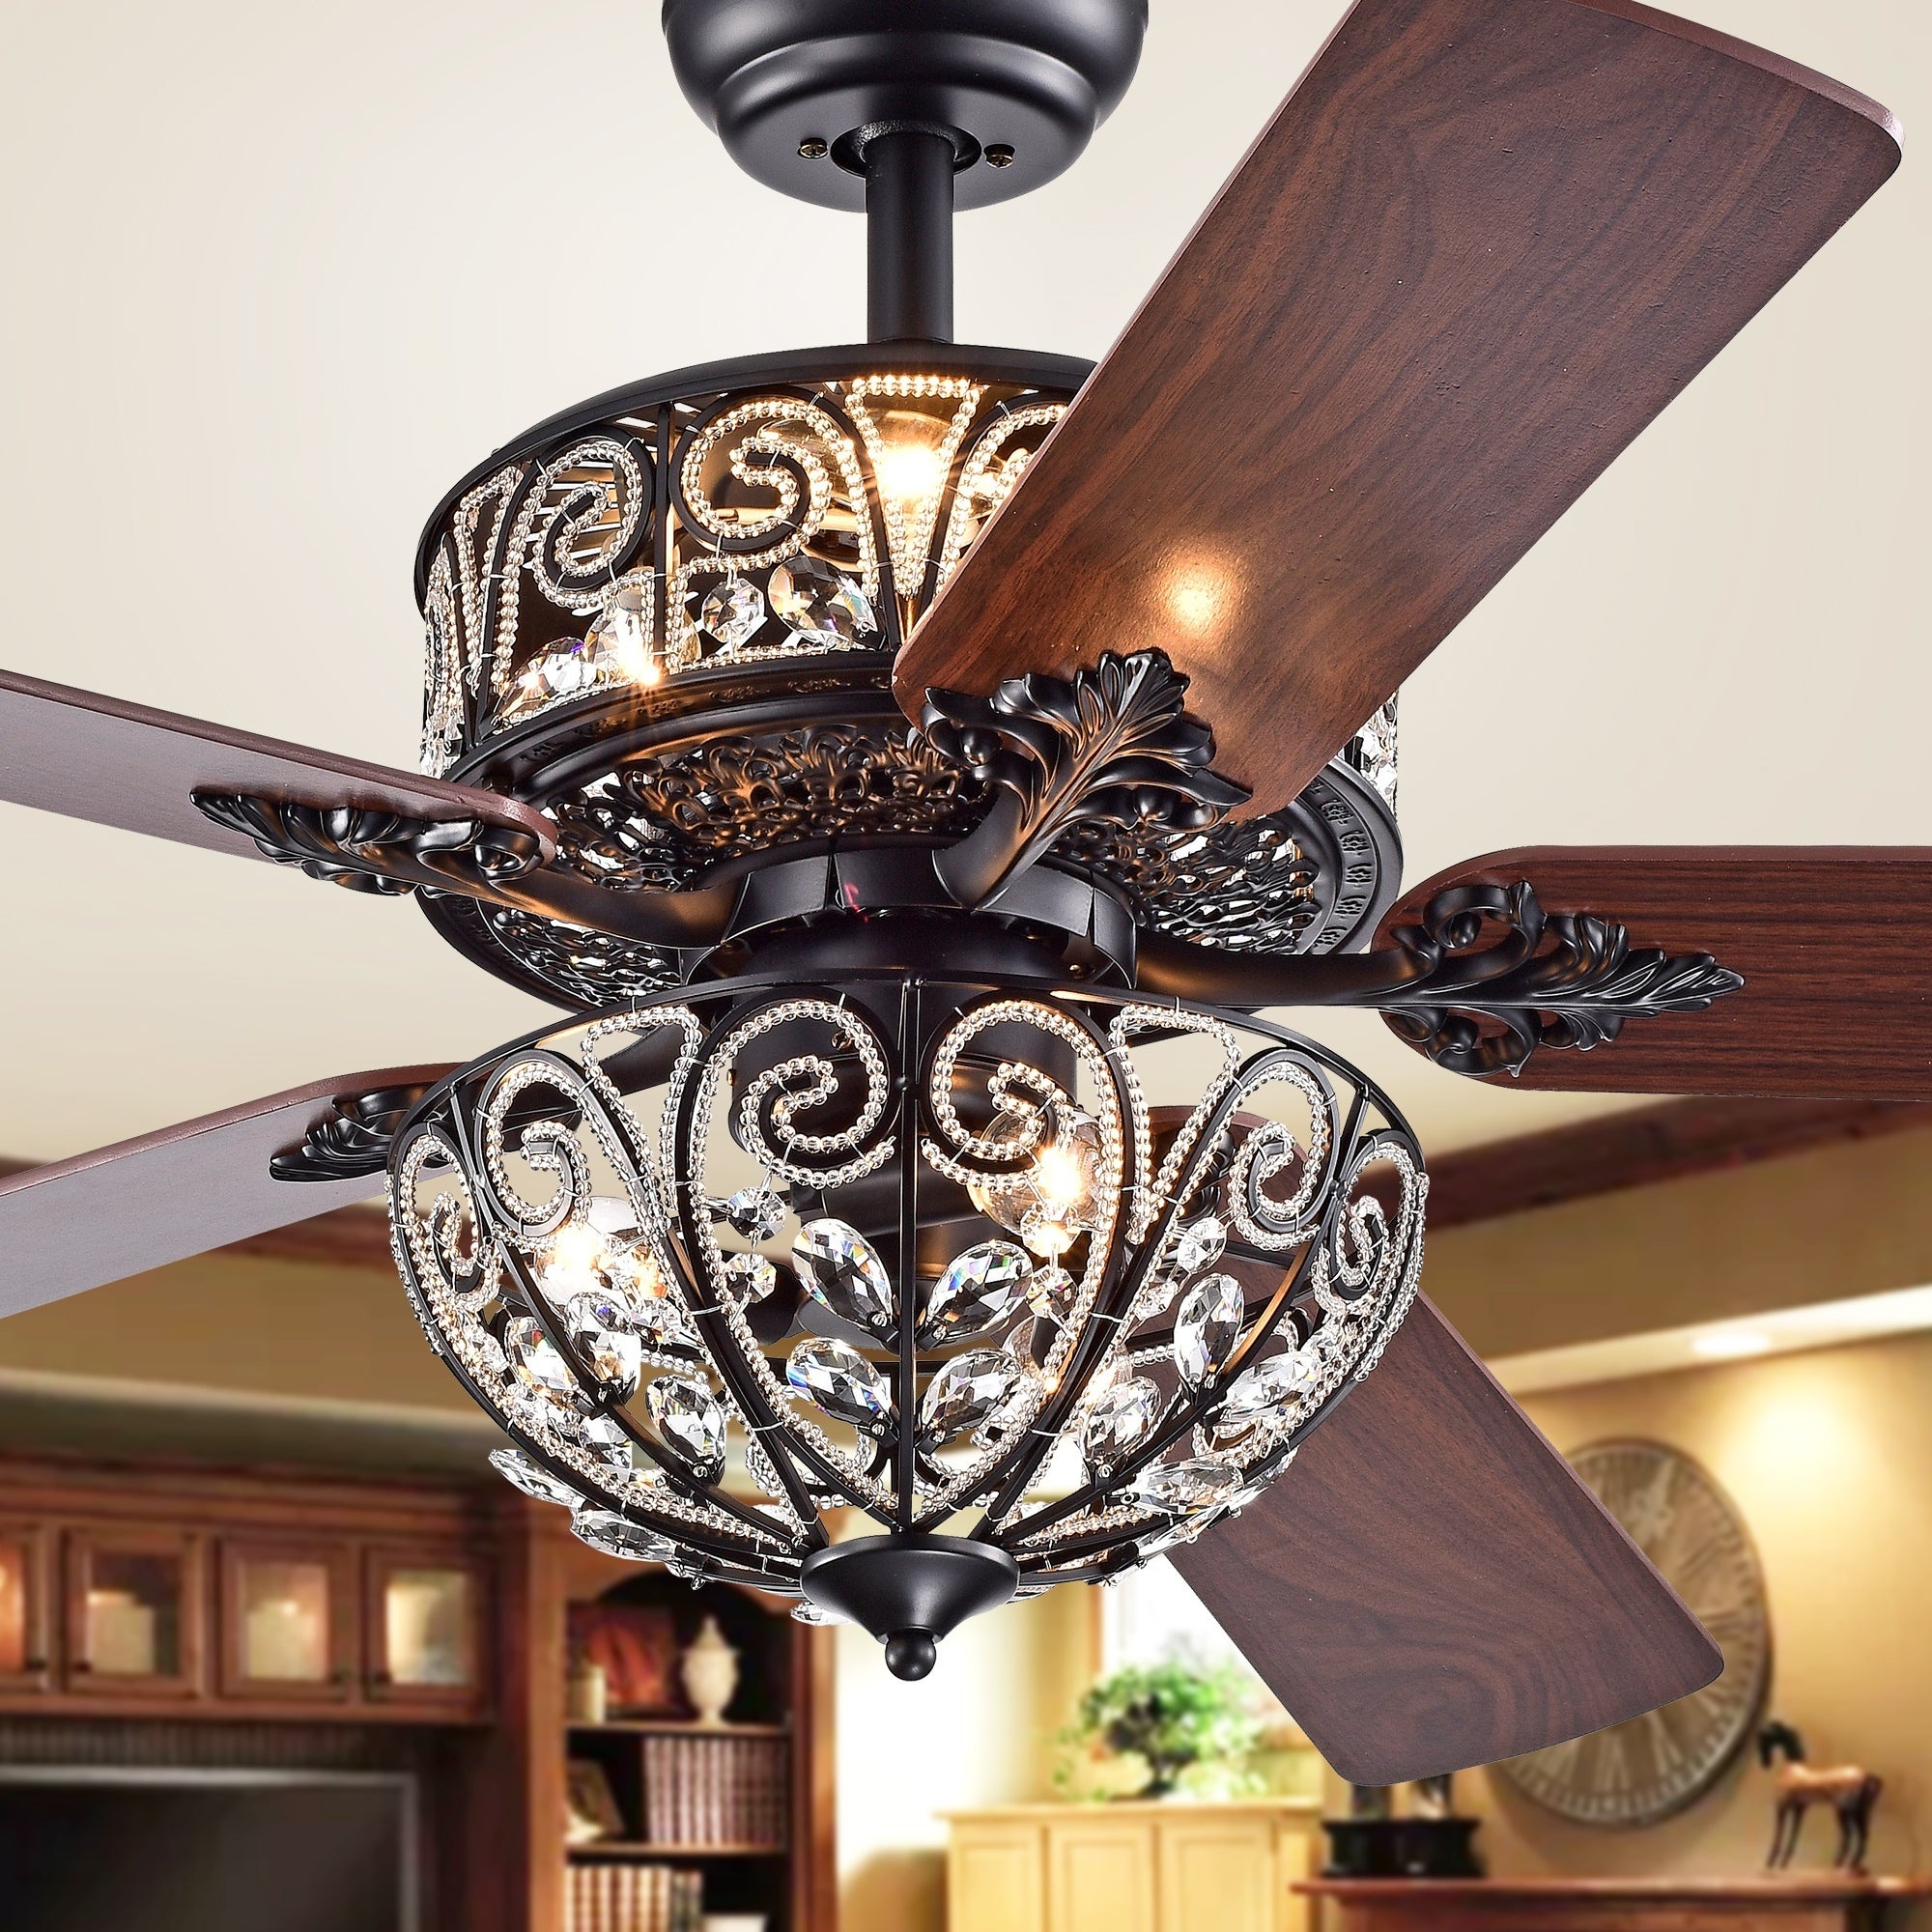 Tisaphon dual lamp, Crystal embellished, 52-inch fan, Chandelier, 2000x2000 HD Phone